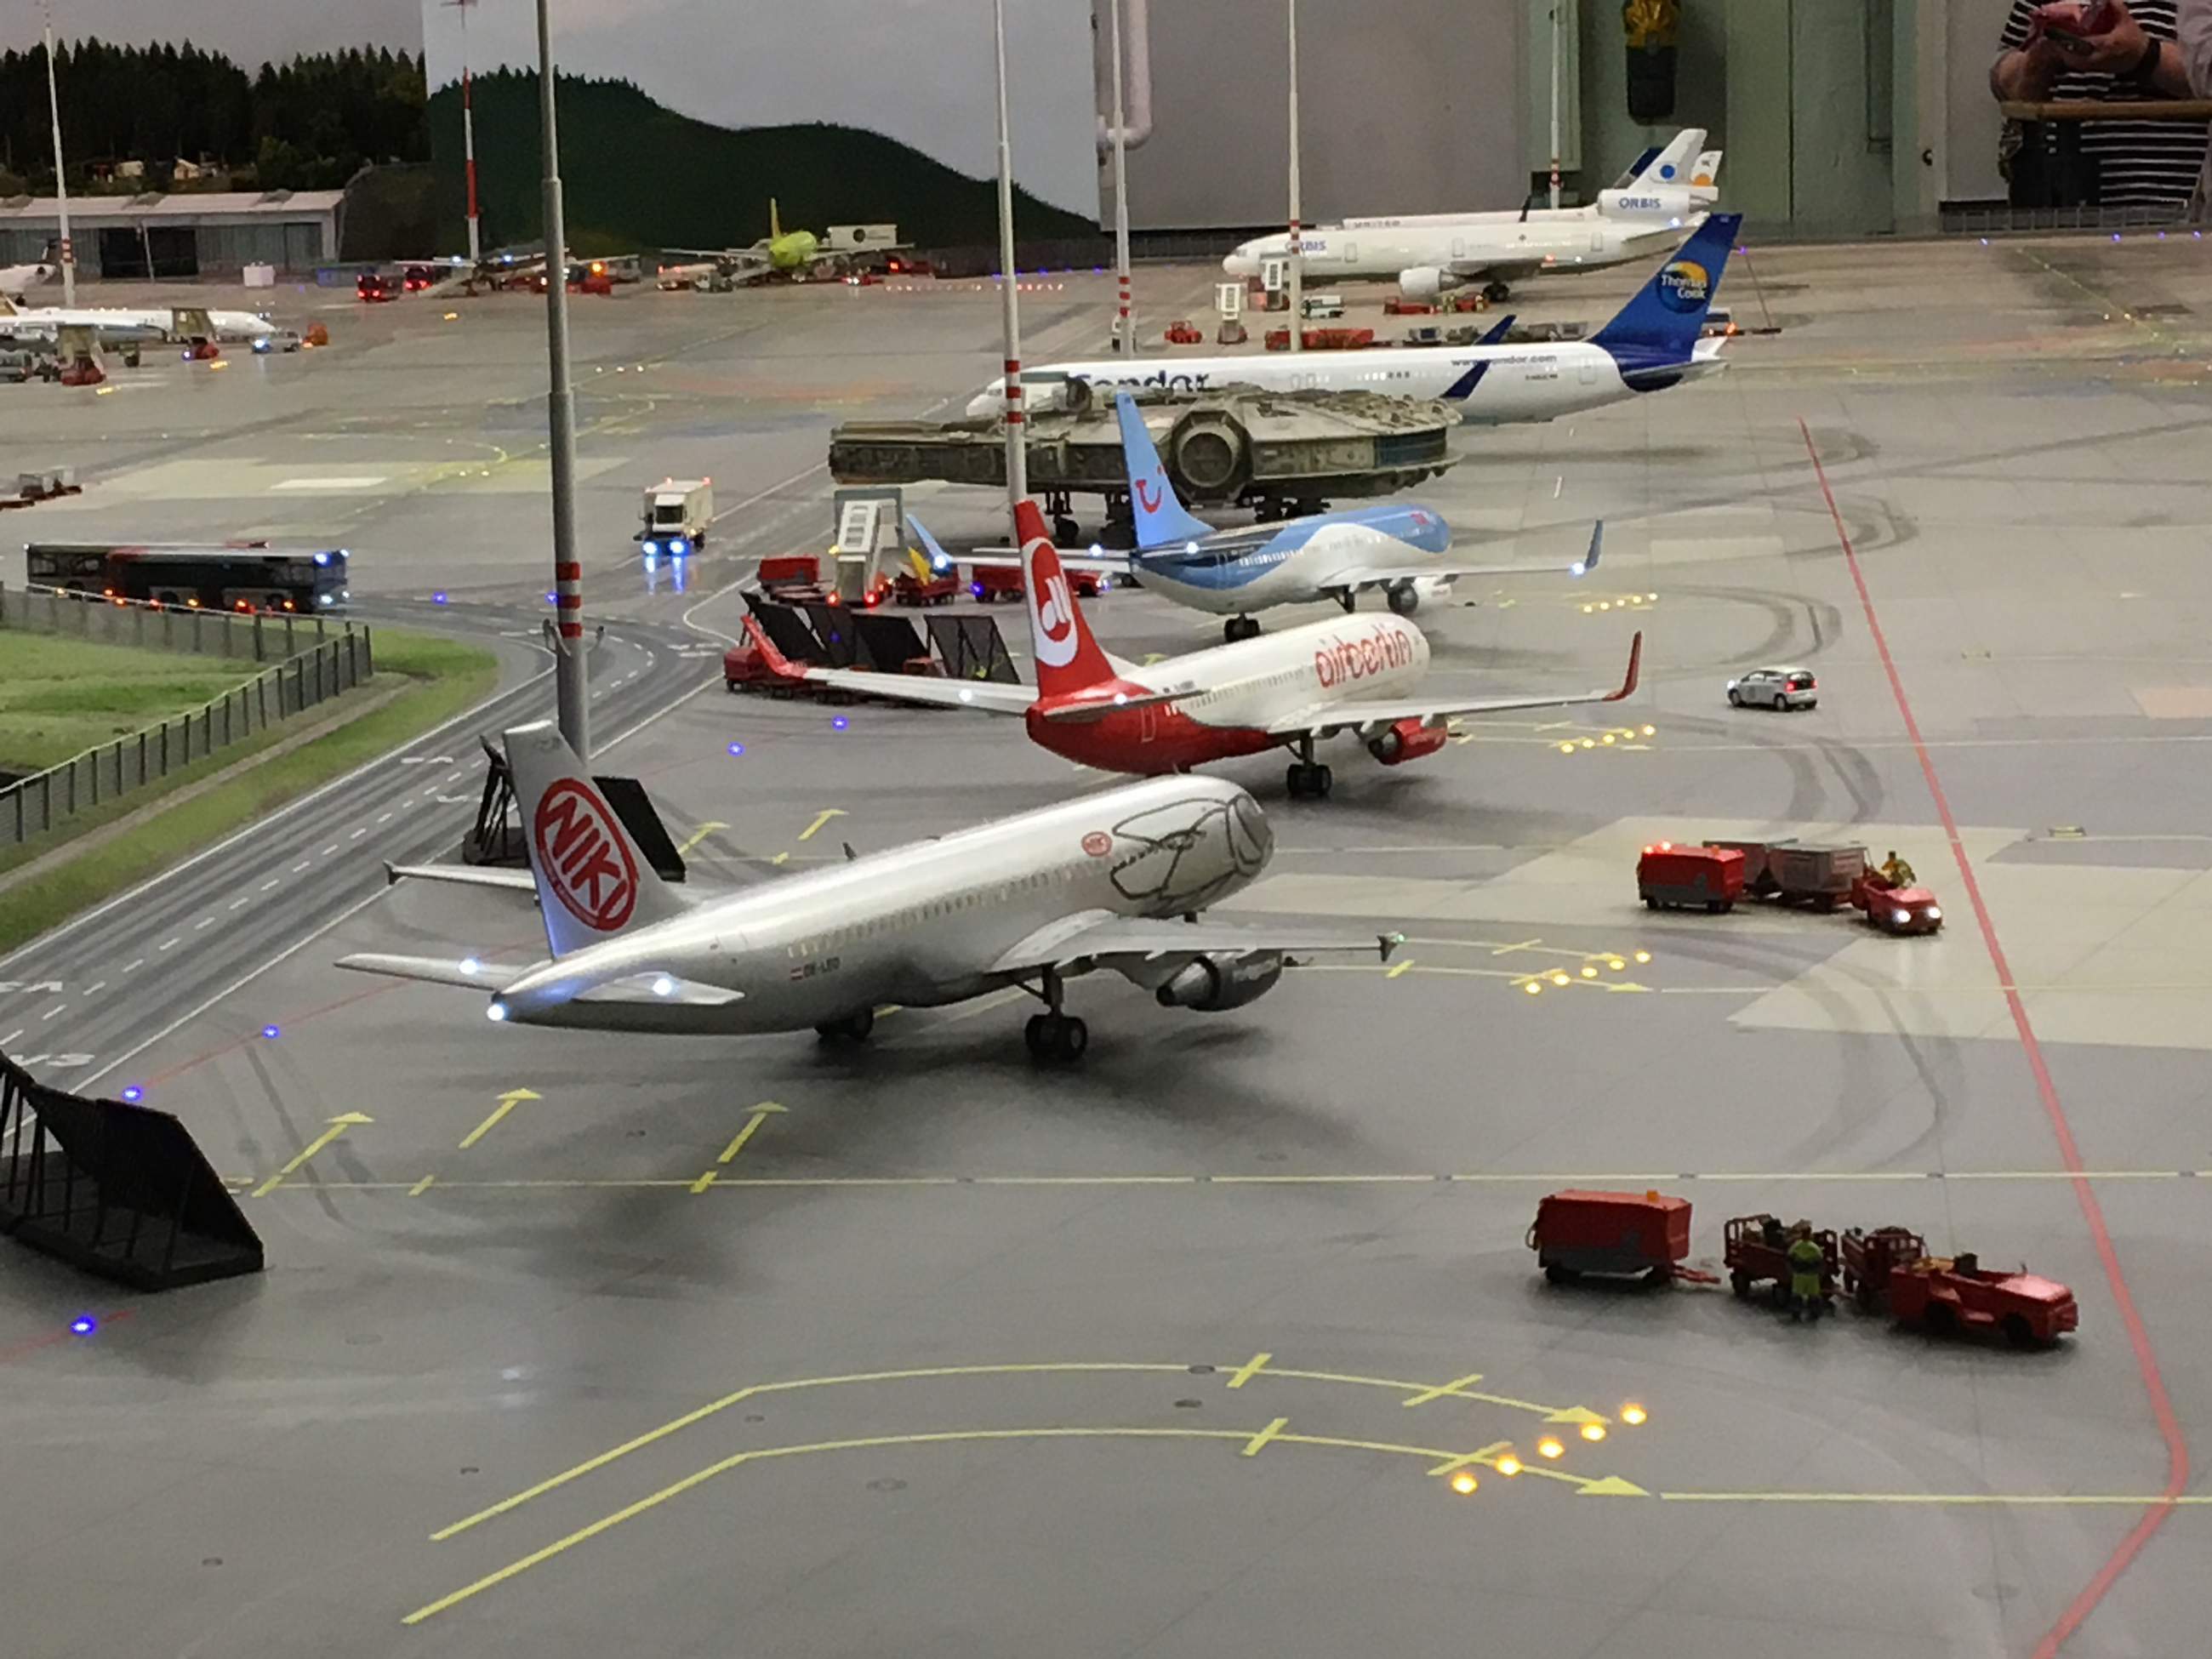 Miniature airplanes parked on the ground at the model airport